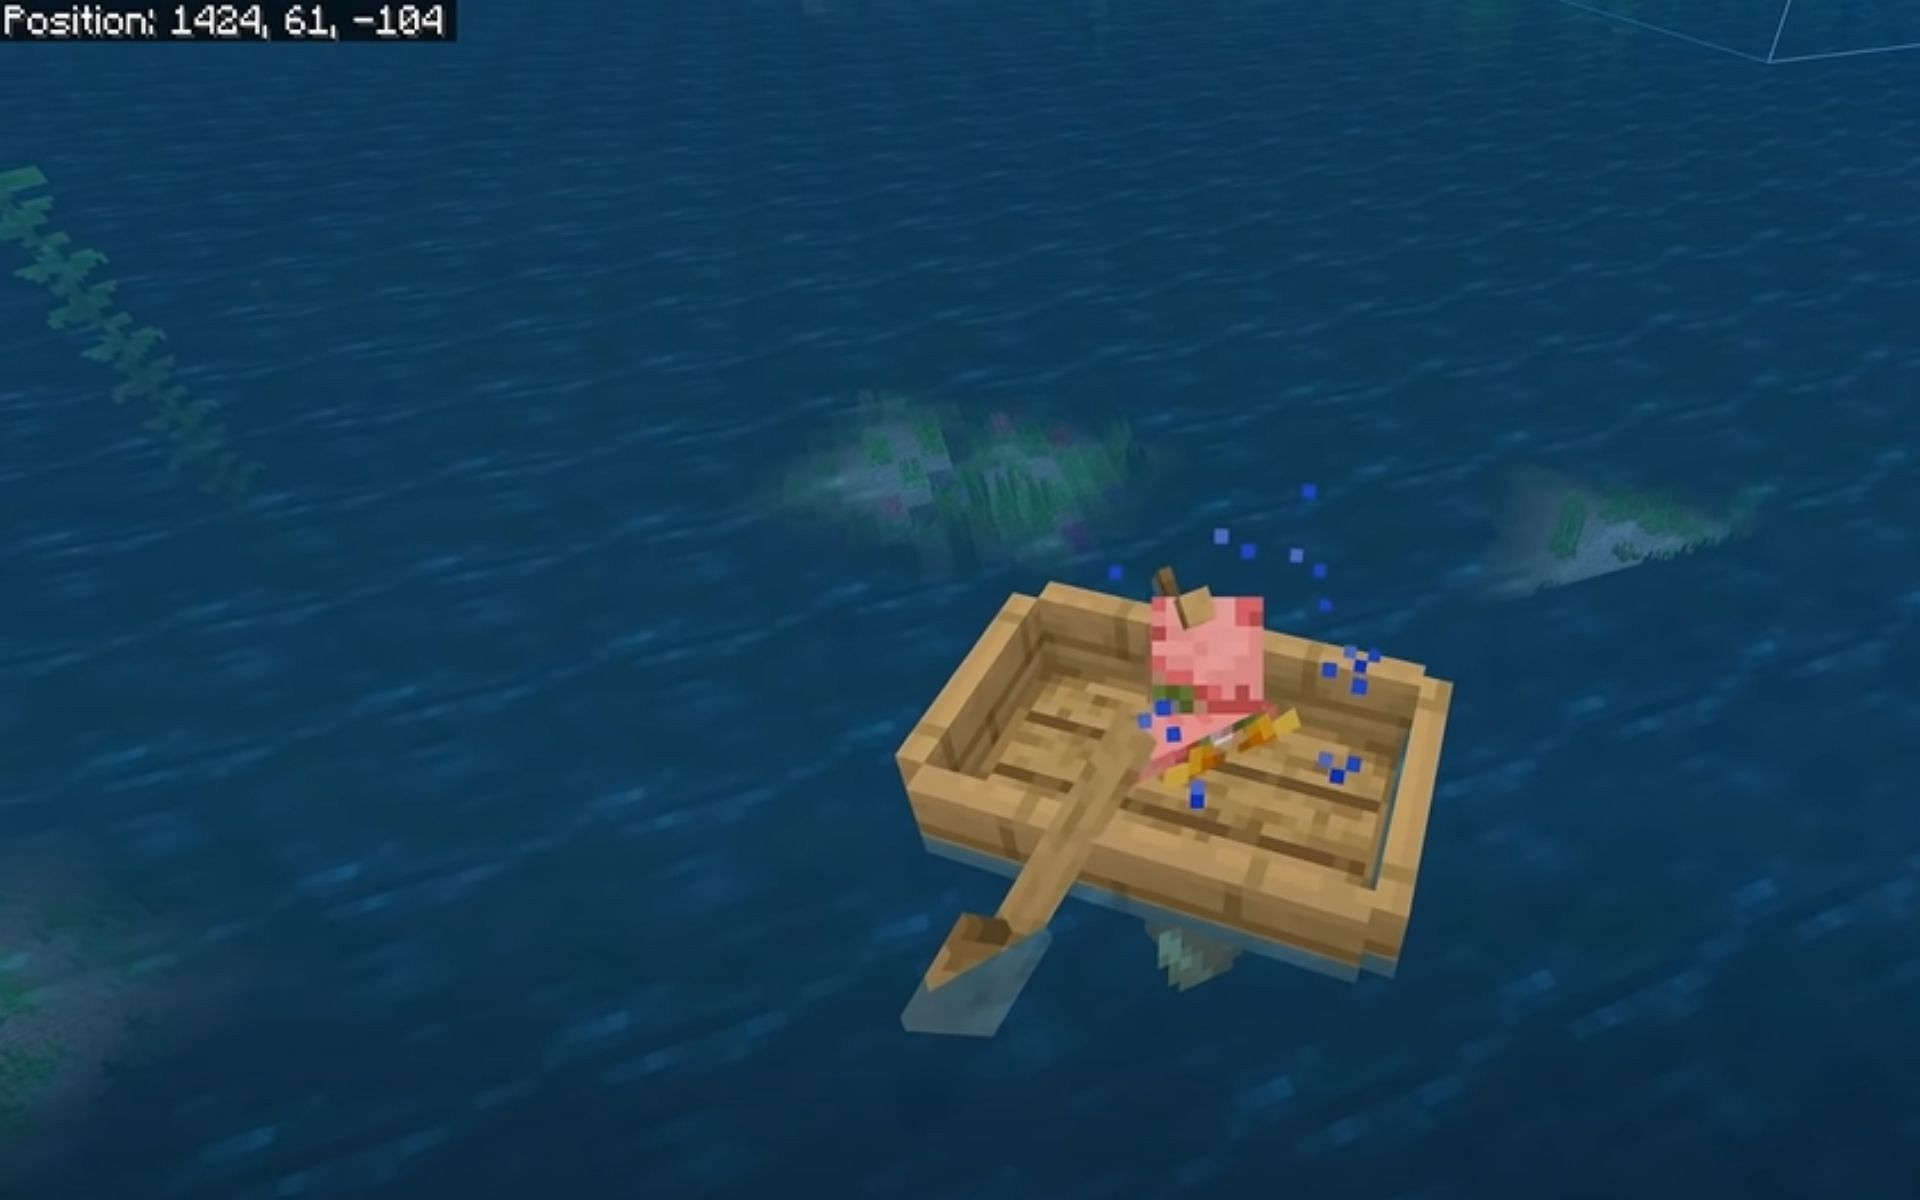 Phasing through the boat when exiting it (Image via YouTube/ silentwisperer)